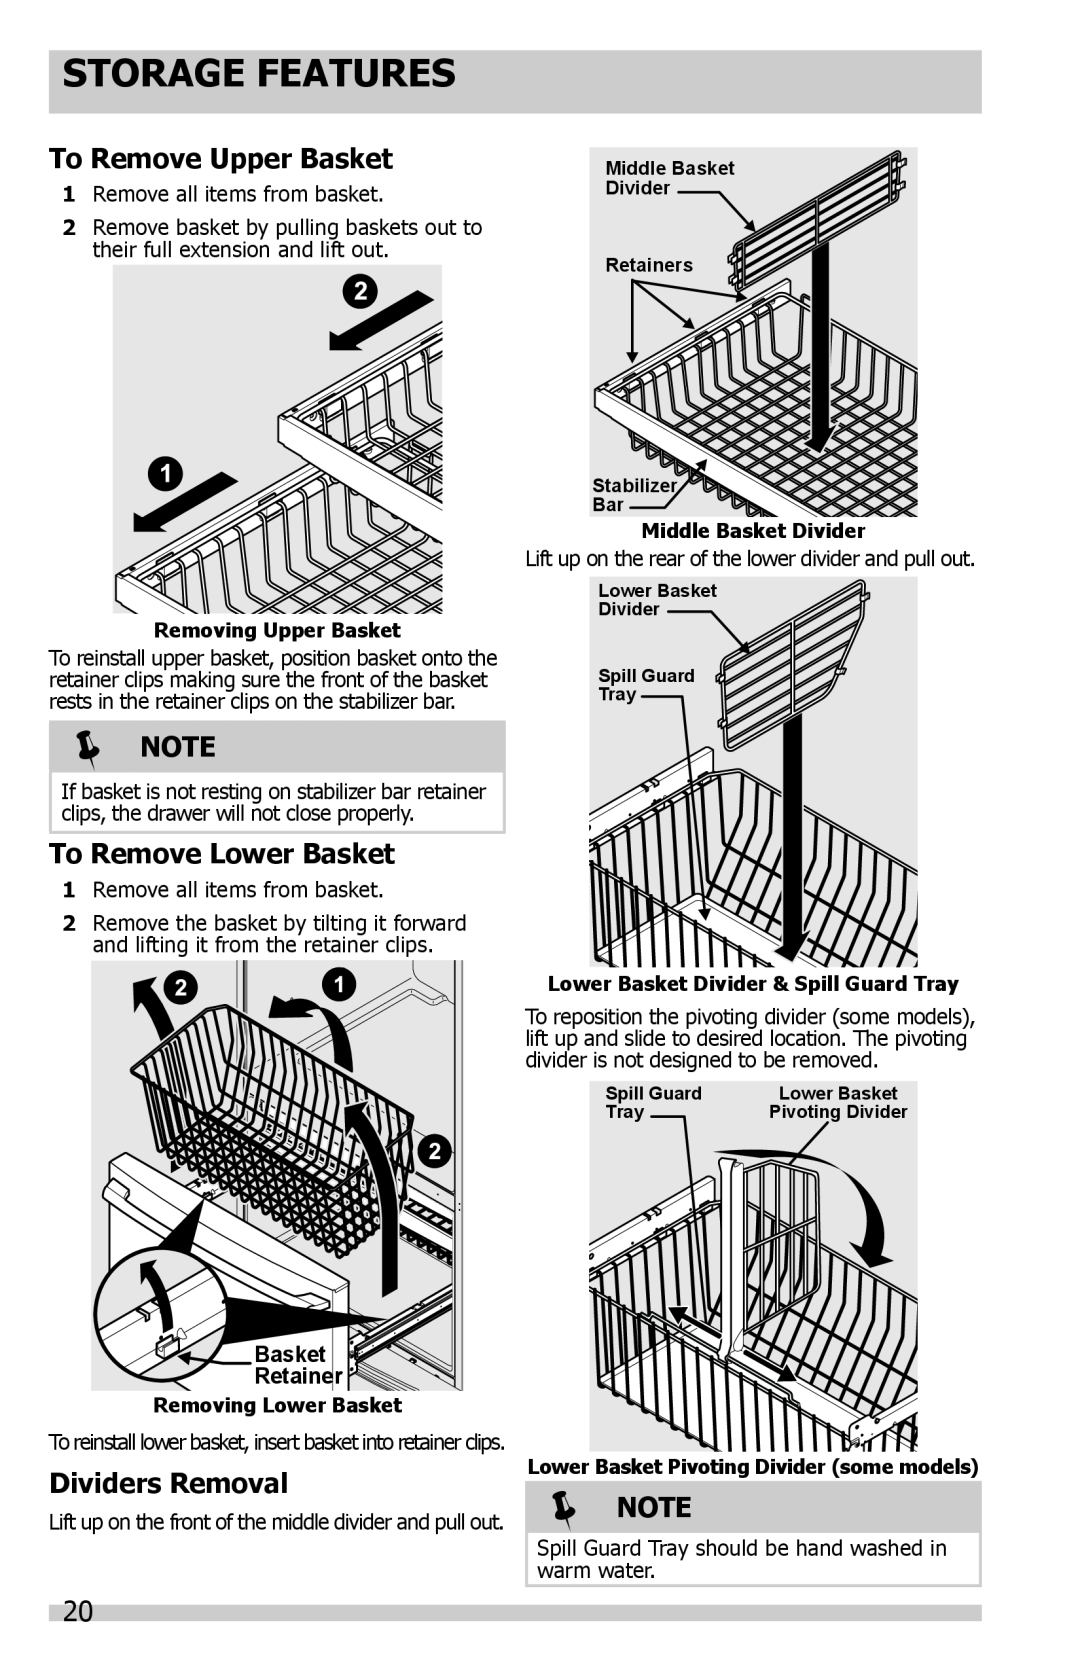 Frigidaire FGHN2844LP manual To Remove Upper Basket, To Remove Lower Basket, Dividers Removal, Storage Features,  Note 